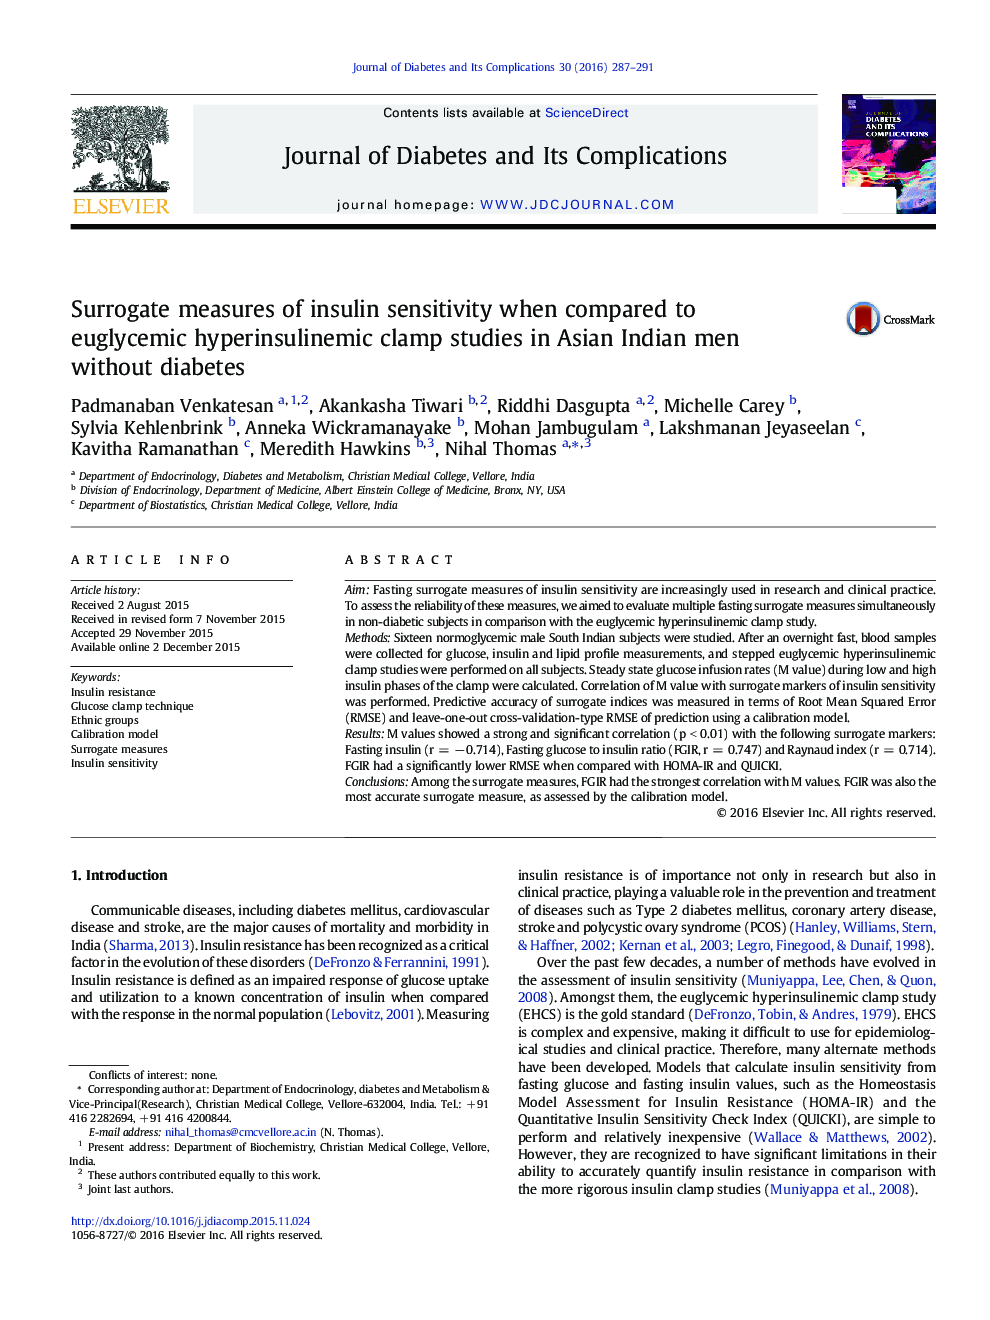 Surrogate measures of insulin sensitivity when compared to euglycemic hyperinsulinemic clamp studies in Asian Indian men without diabetes